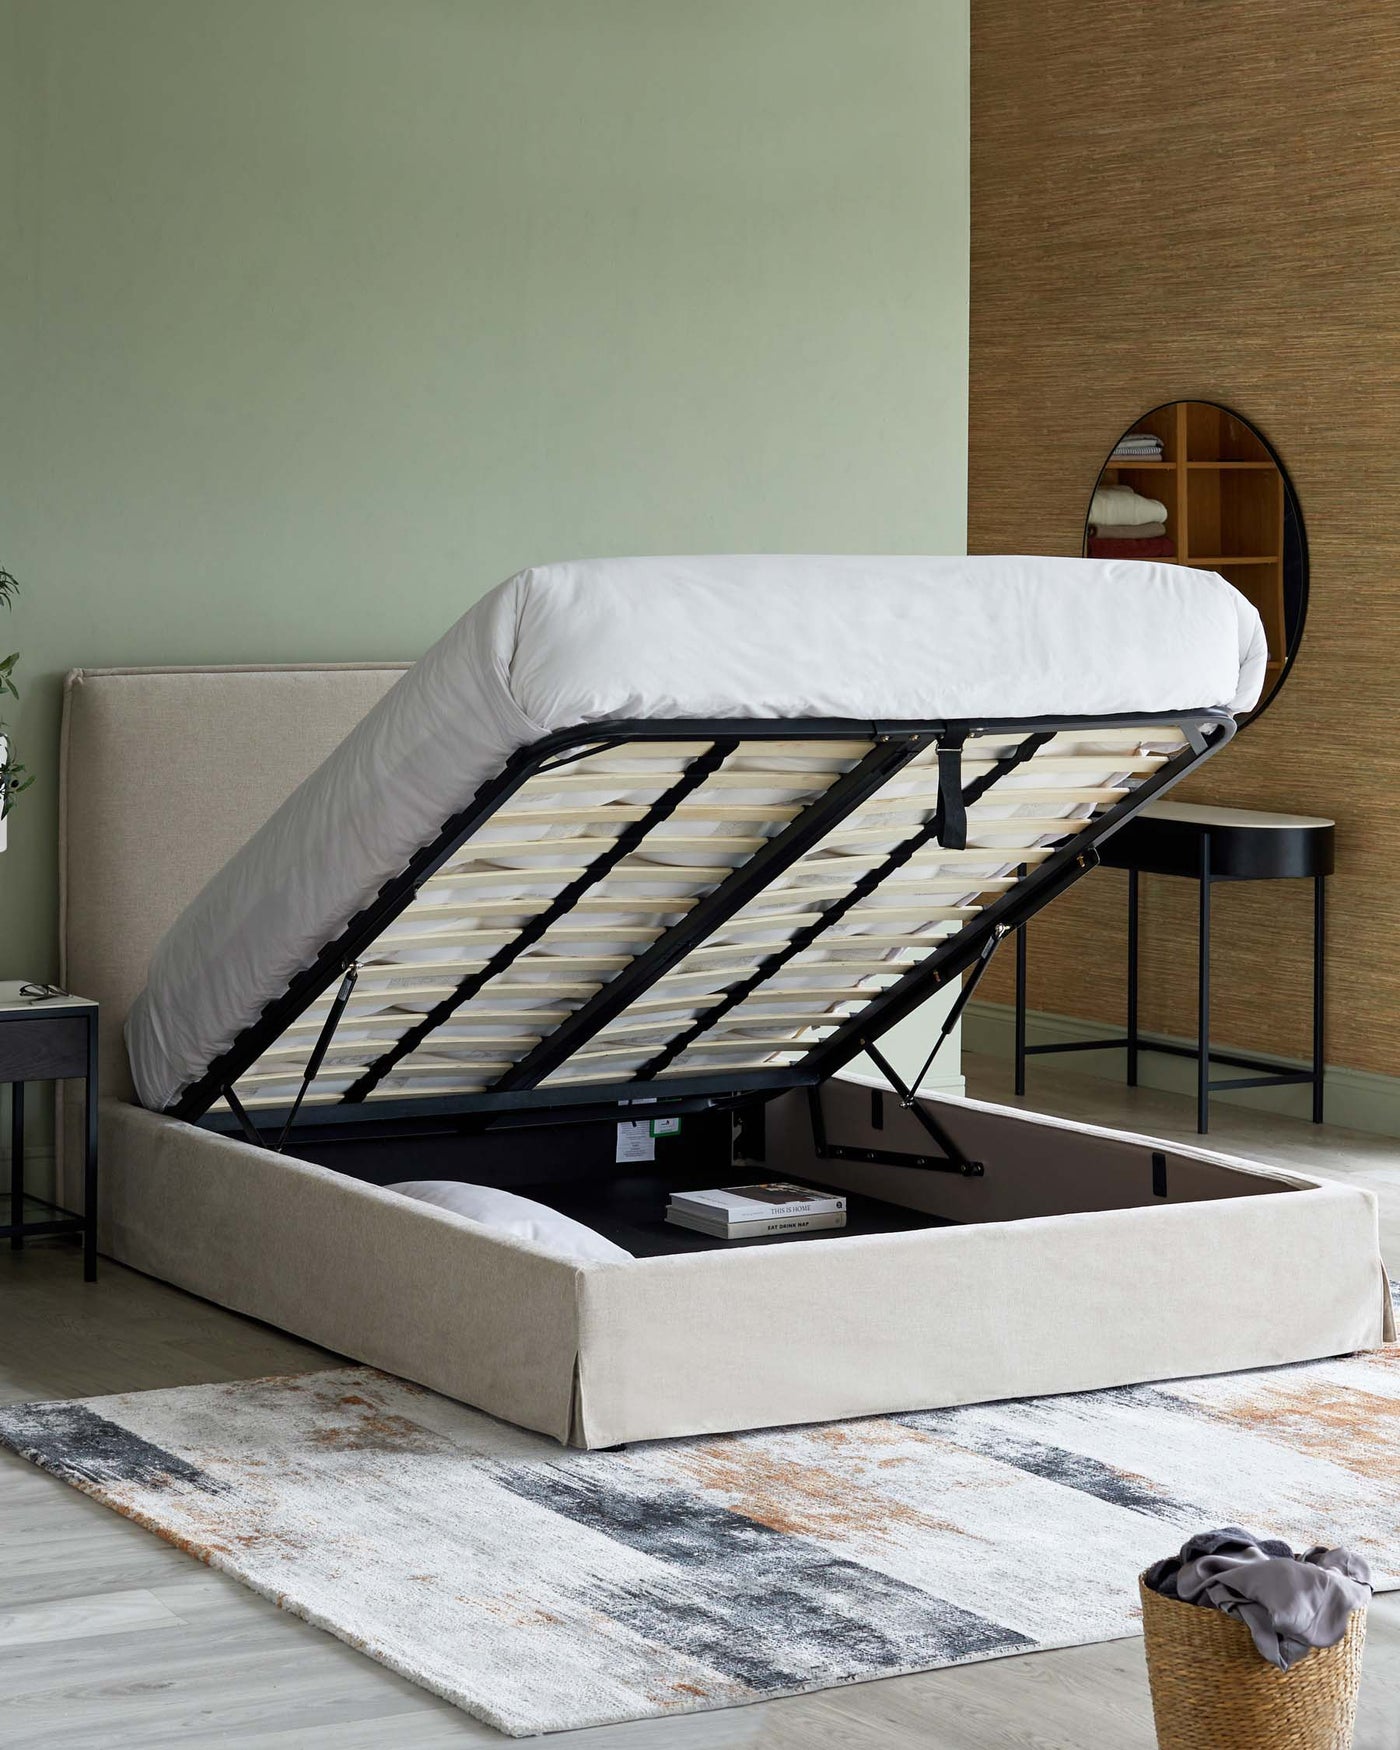 Modern beige upholstered storage bed with lifted mattress platform revealing a spacious under-bed storage compartment, set on a textured area rug with a neutral and rust colour scheme, alongside a sleek, black round side table, against a backdrop with light green walls and a round wooden-framed mirror.